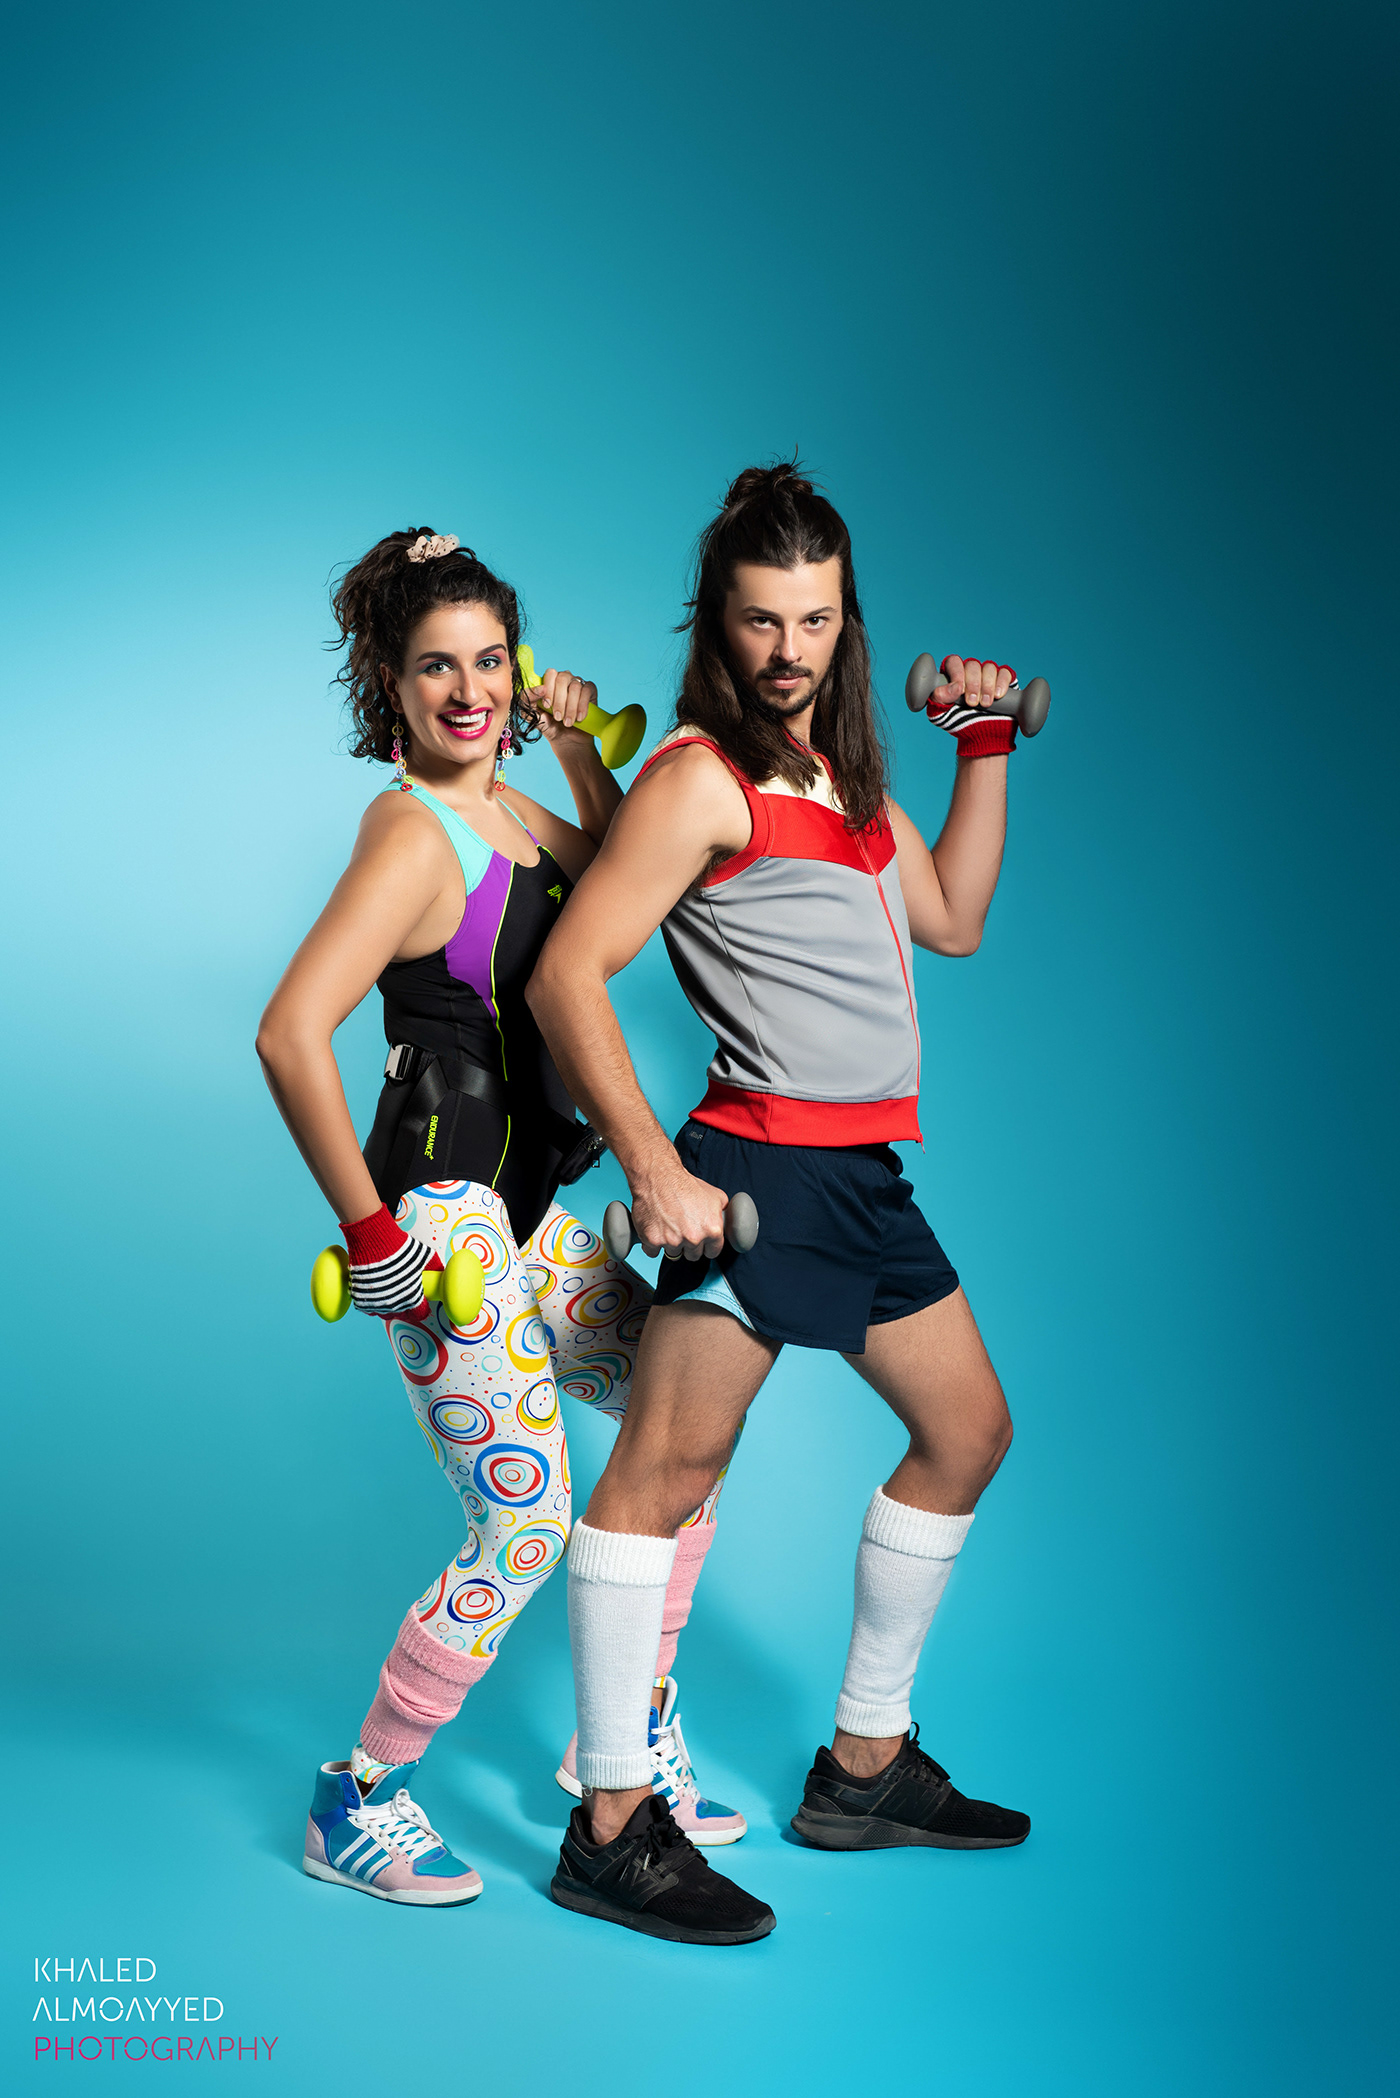 80s Aerobics funny Hilarious excercise Stretching fitness sport Couple's portraits jazzercise